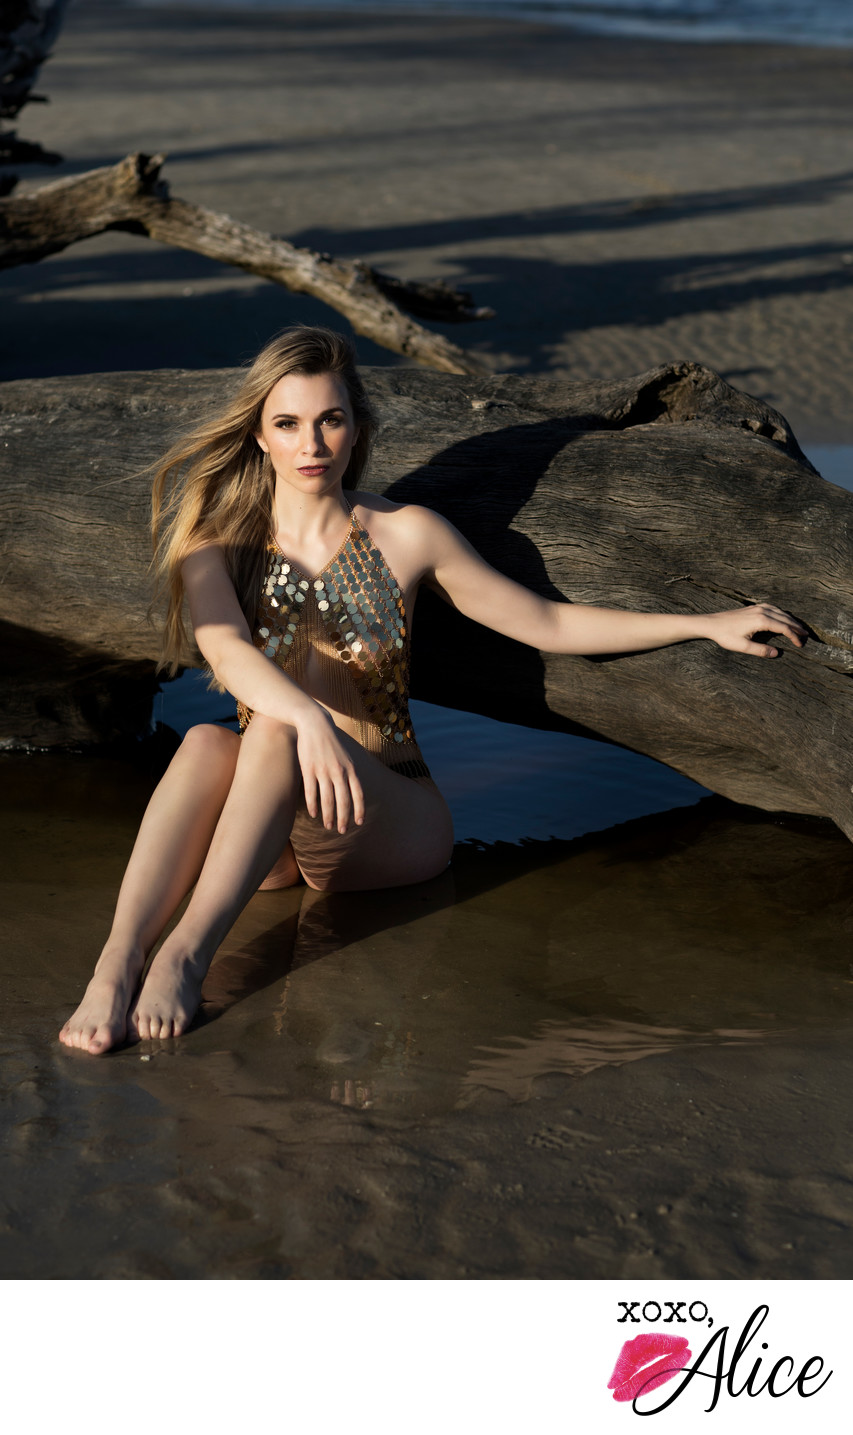 Driftwood Beach makes the perfect backdrop for photos